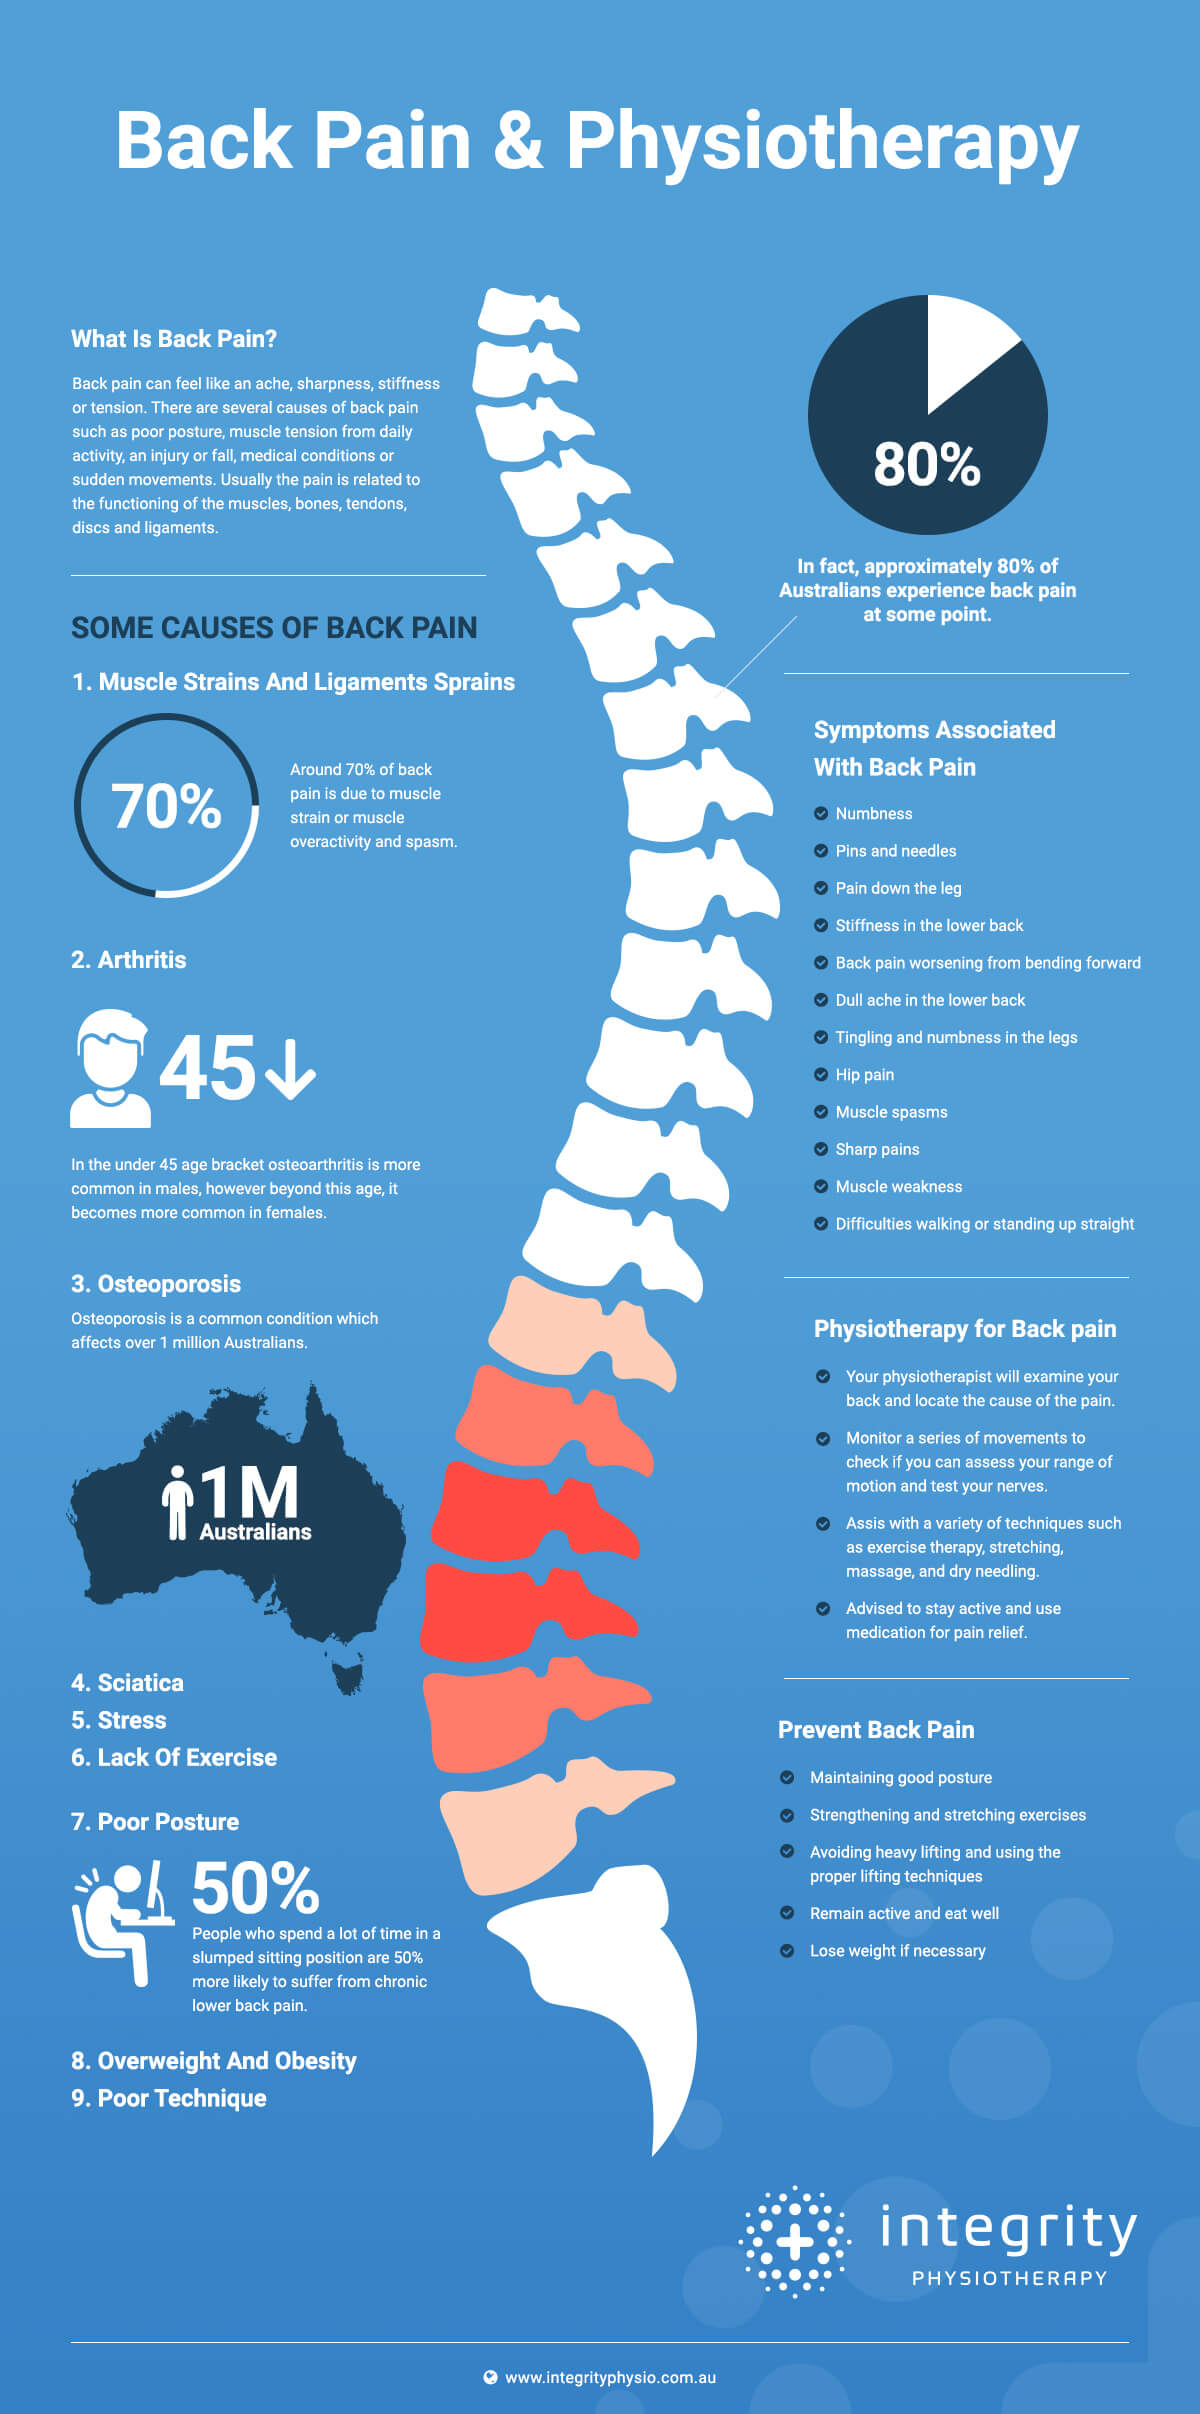 http://www.integrityphysio.com.au/wp-content/uploads/2023/01/Physiotherapy-for-Back-Pain.jpg